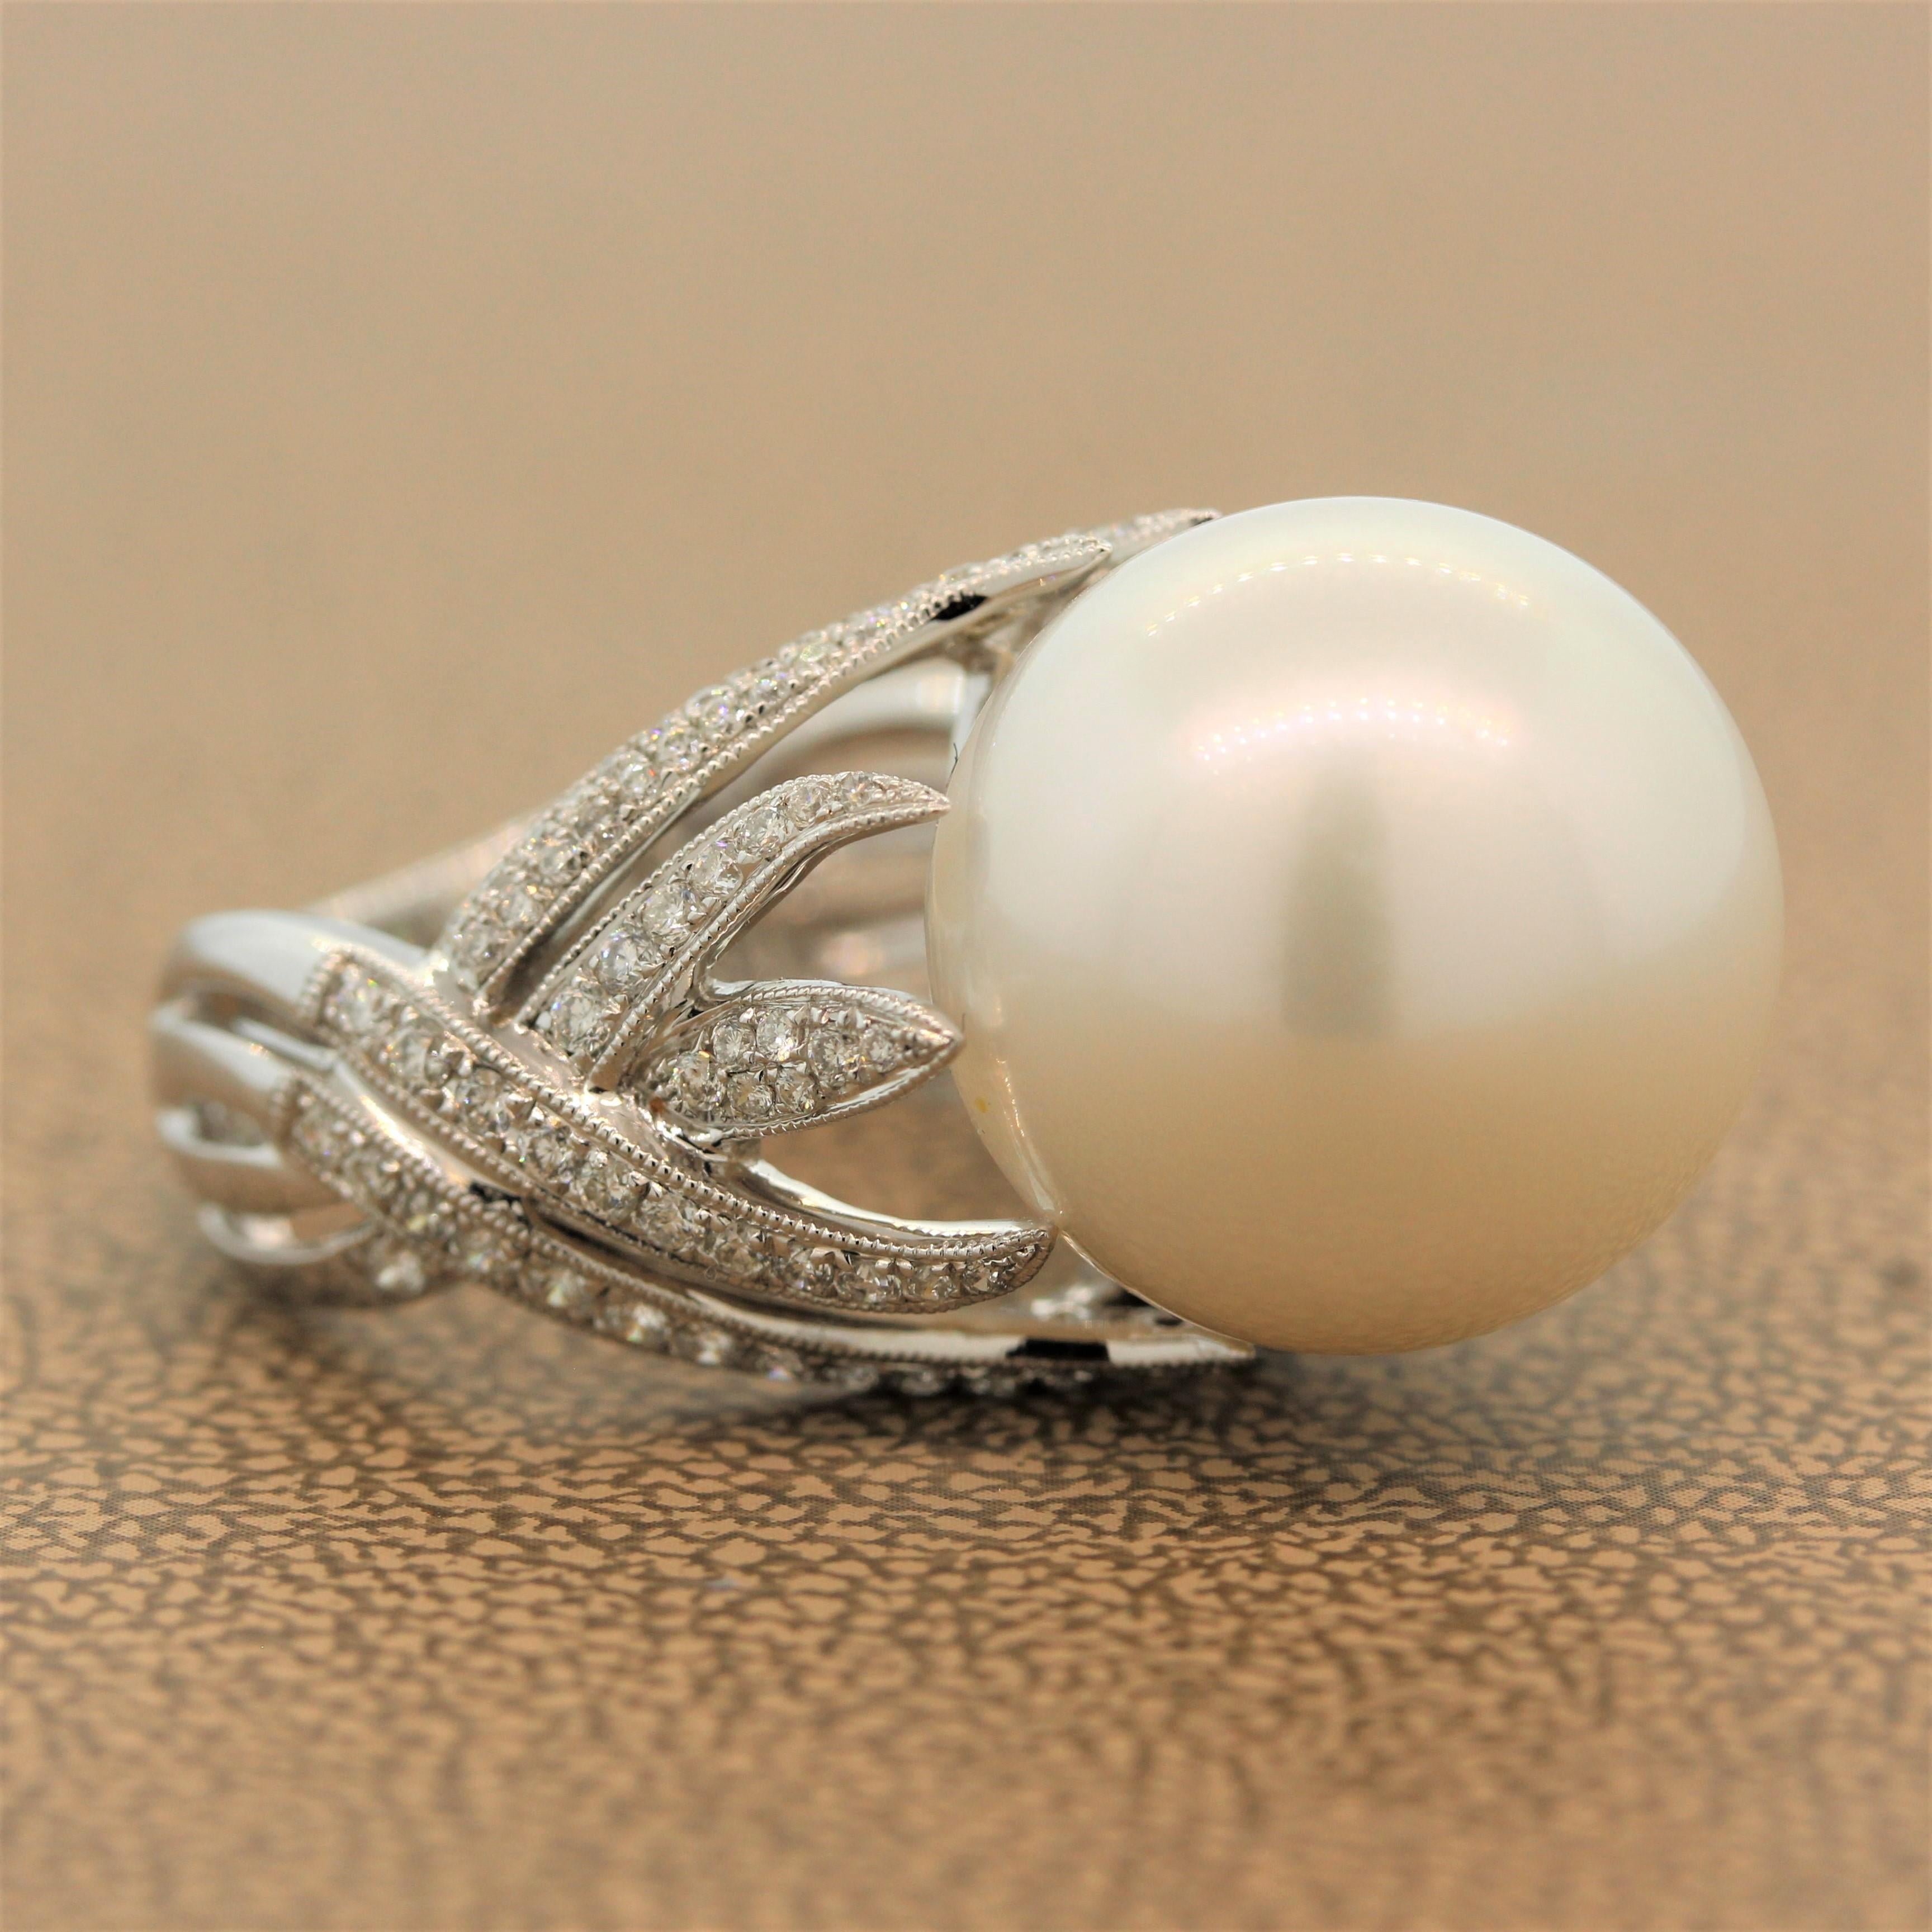 A lustrous 16.5mm South Sea pearl sits high in a flame-like designed setting of 18K white gold. With 0.77 carats of round cut sparkling colorless diamonds, this ring will make you wish you lived under the sea.

Ring Size (Sizable) 6.75
